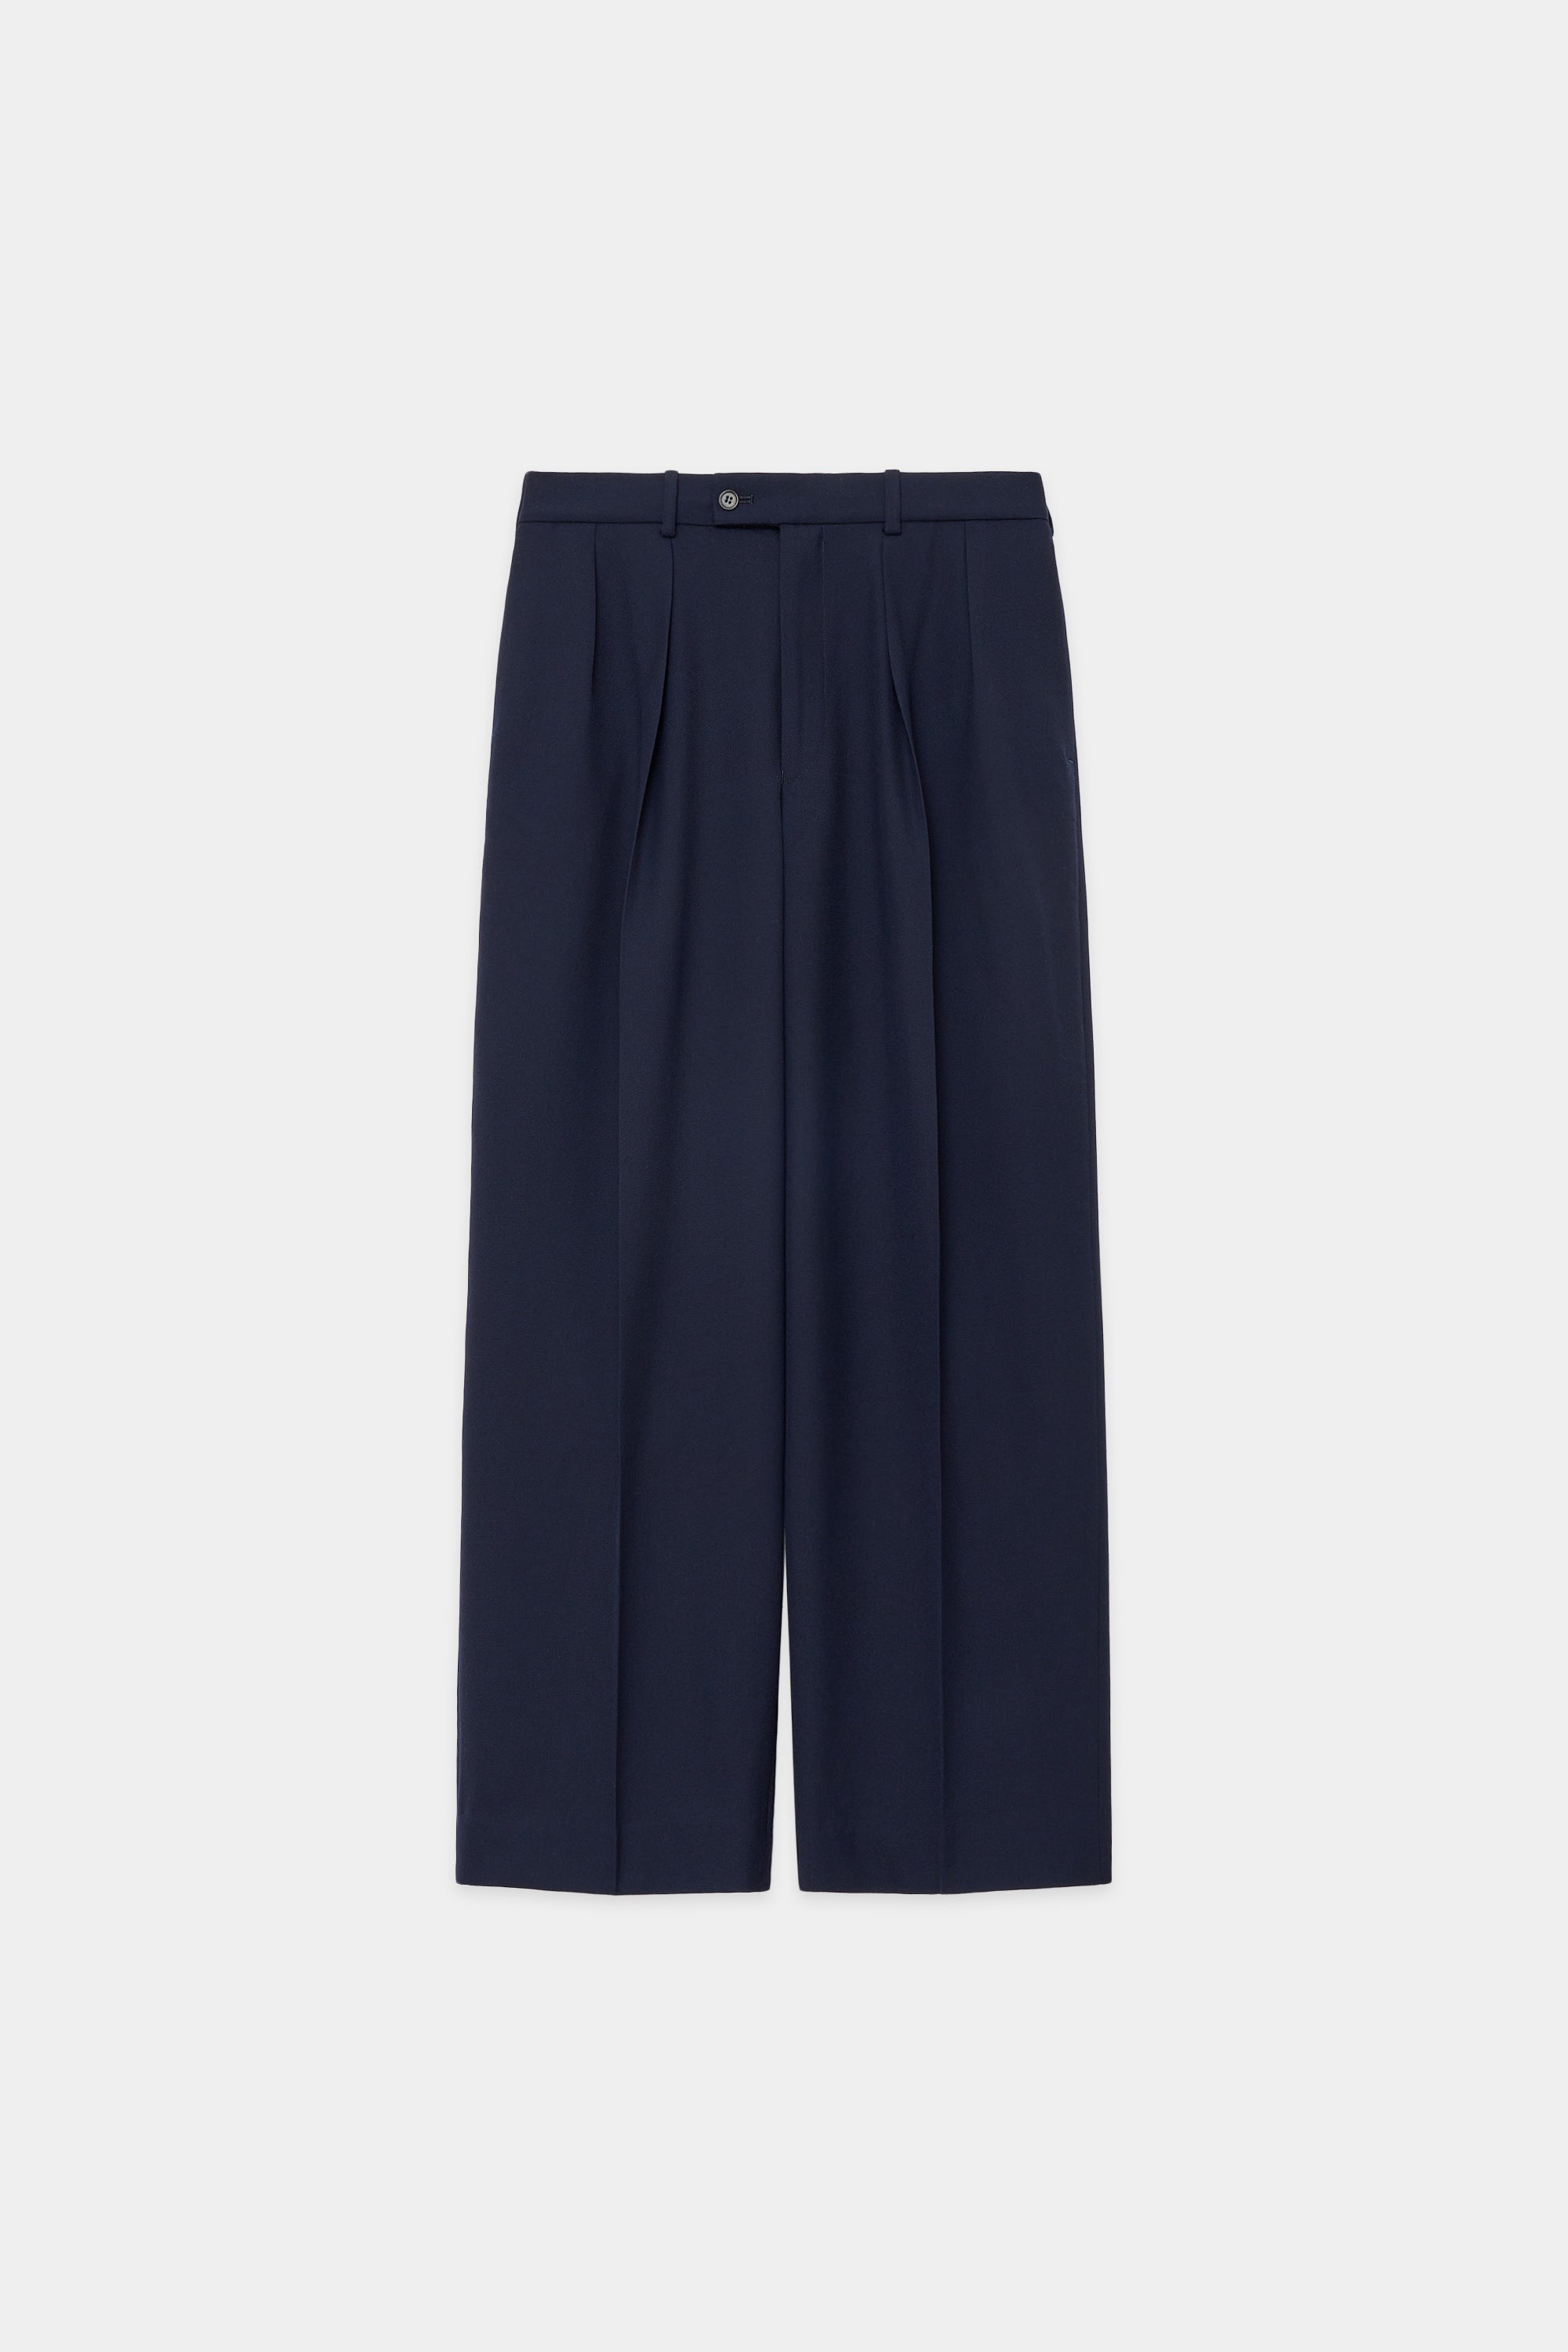 ORGANIC WOOL SURVIVAL CLOTH DOUBLE PLEATED TROUSERS, Navy